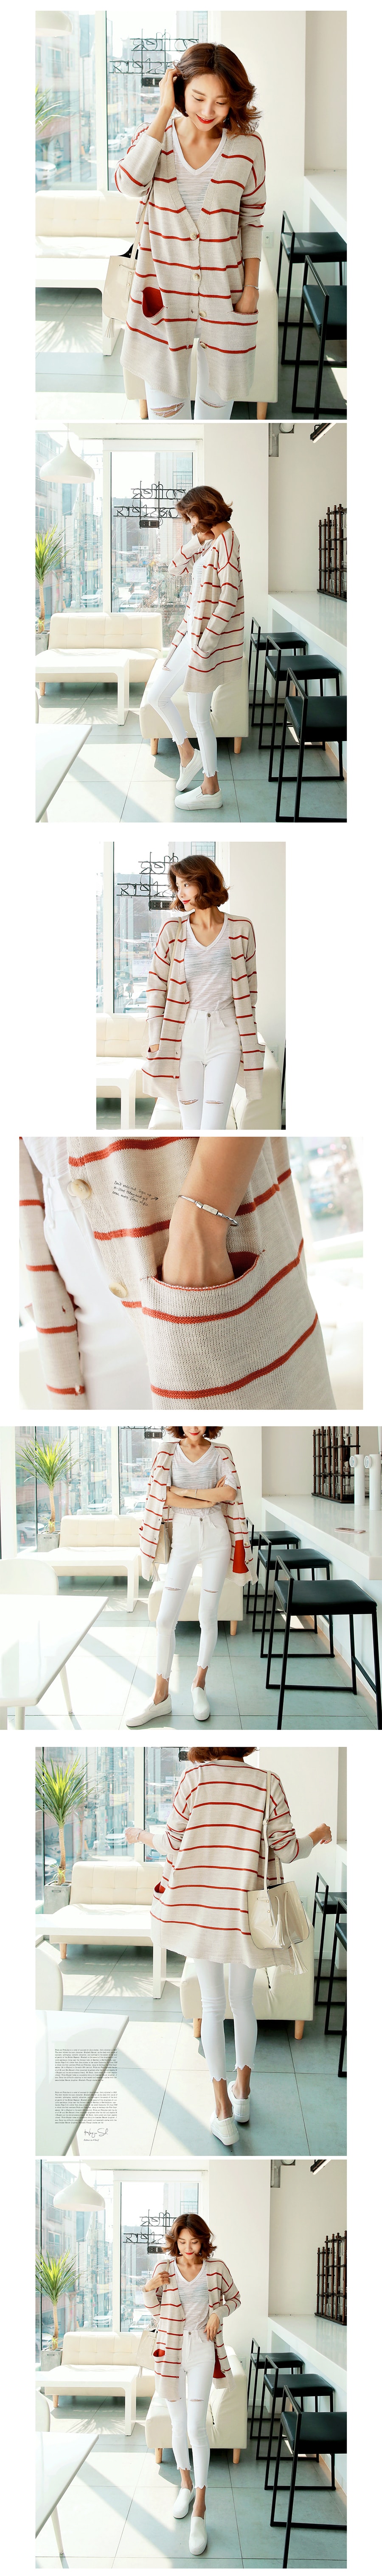 KOREA Color-Block Pocket Cardigan #Beige+Red Stripe One Size(S-M) [Free Shipping]